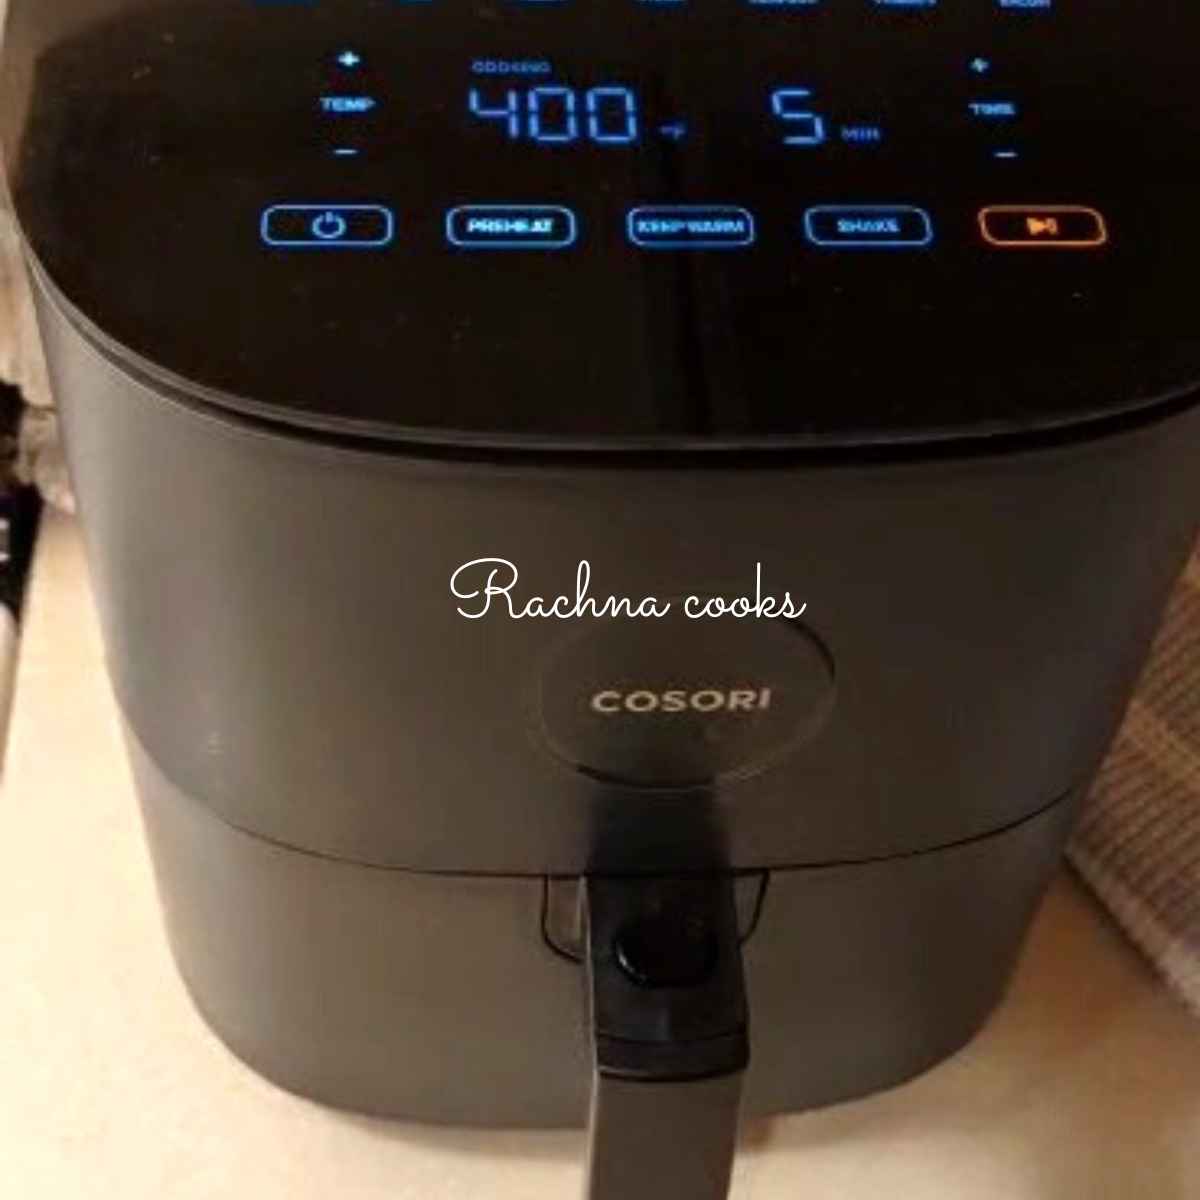 Air fryer with settings for making gyozas